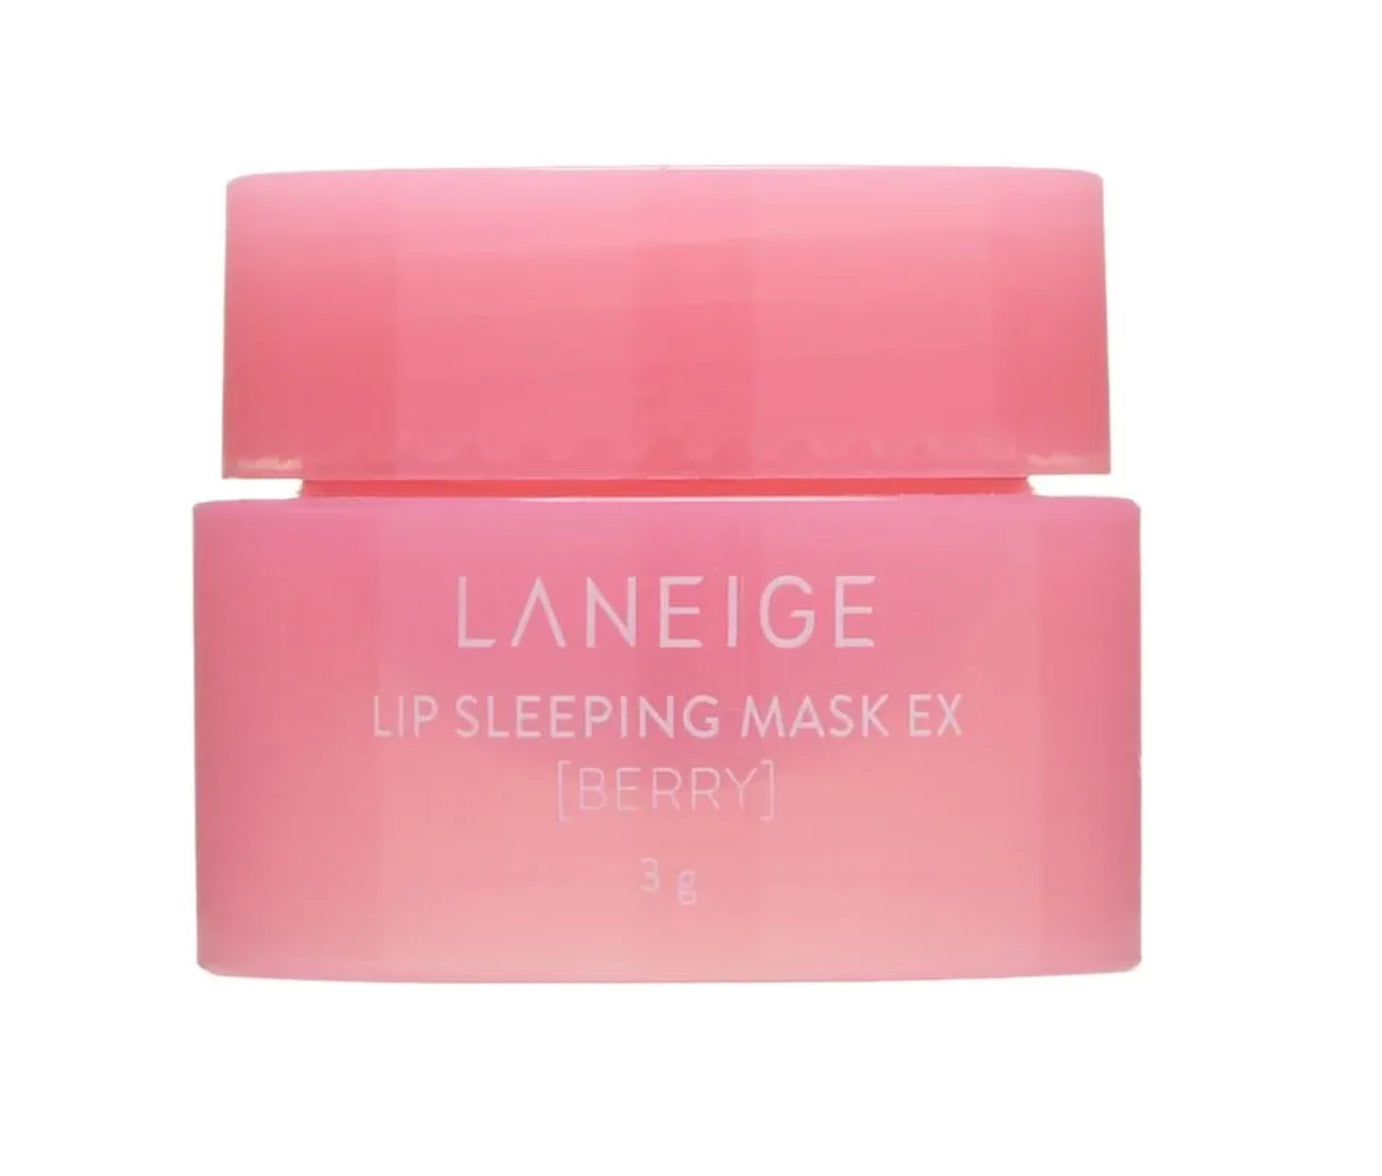 Mini Lip Sleeping Mask Intense Hydration with Vitamin C travel size wehitpan exclusive, product photo, 3 grams